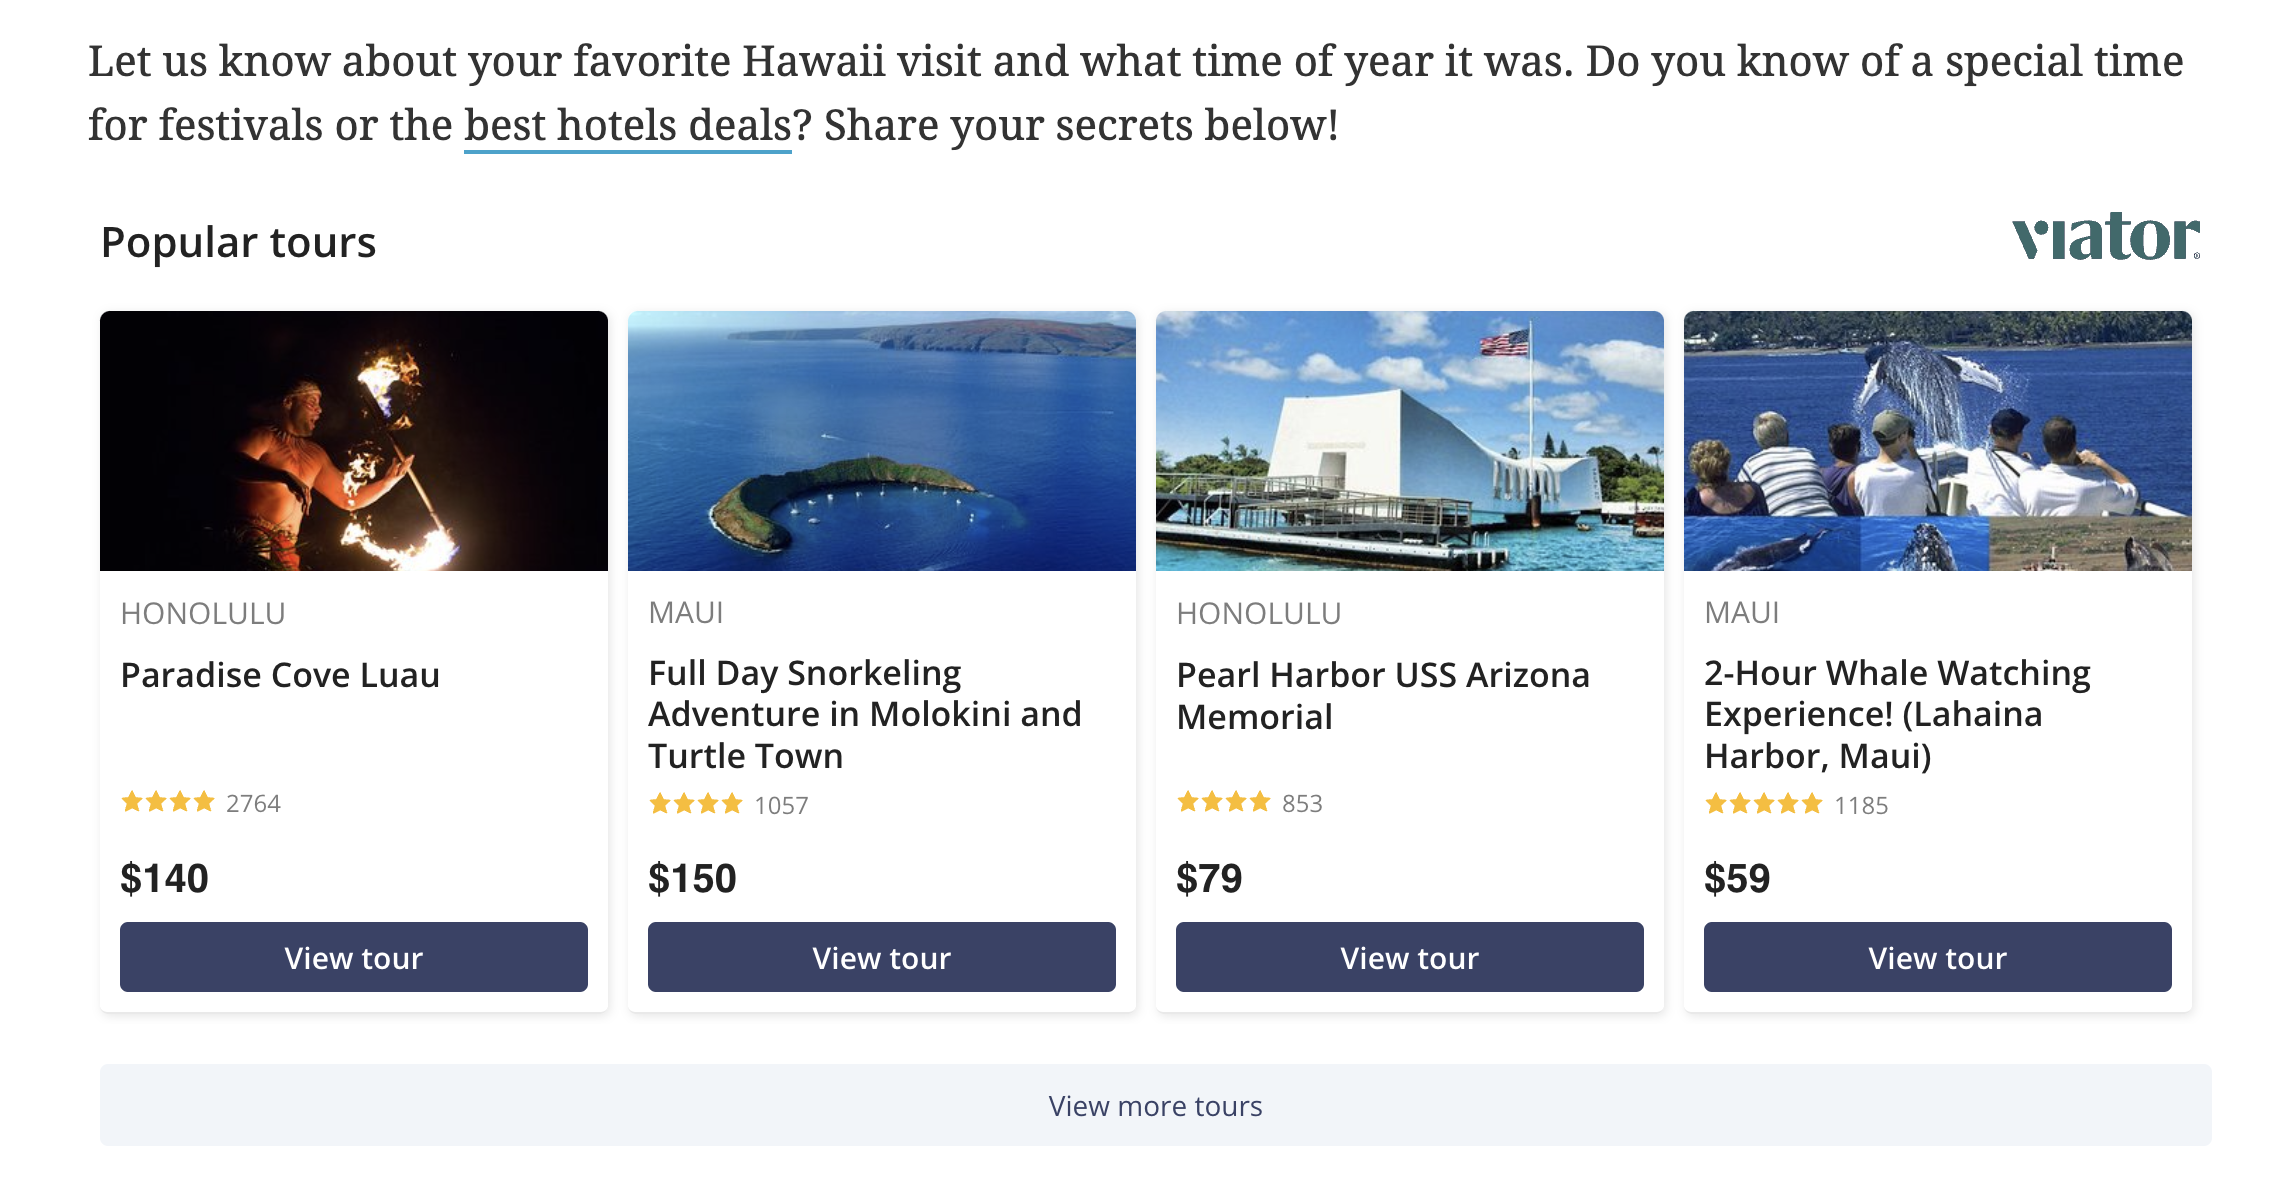 An Example of placing a link to hotels and tours widget in an article on Suitesandlobbies.com